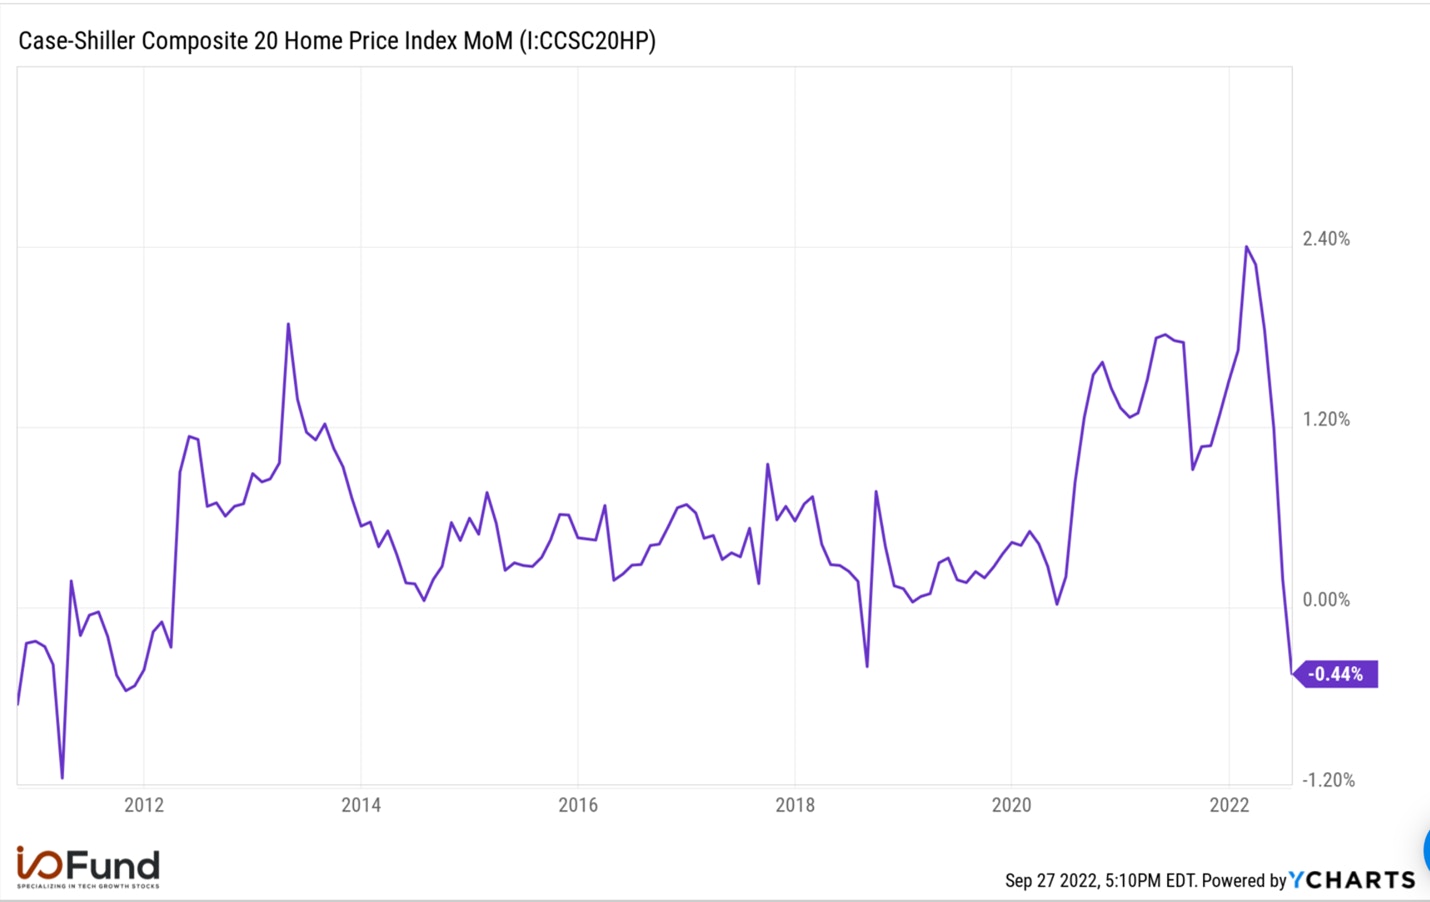 Case-Shiller Composite 20 Home Price Index MoM Chart